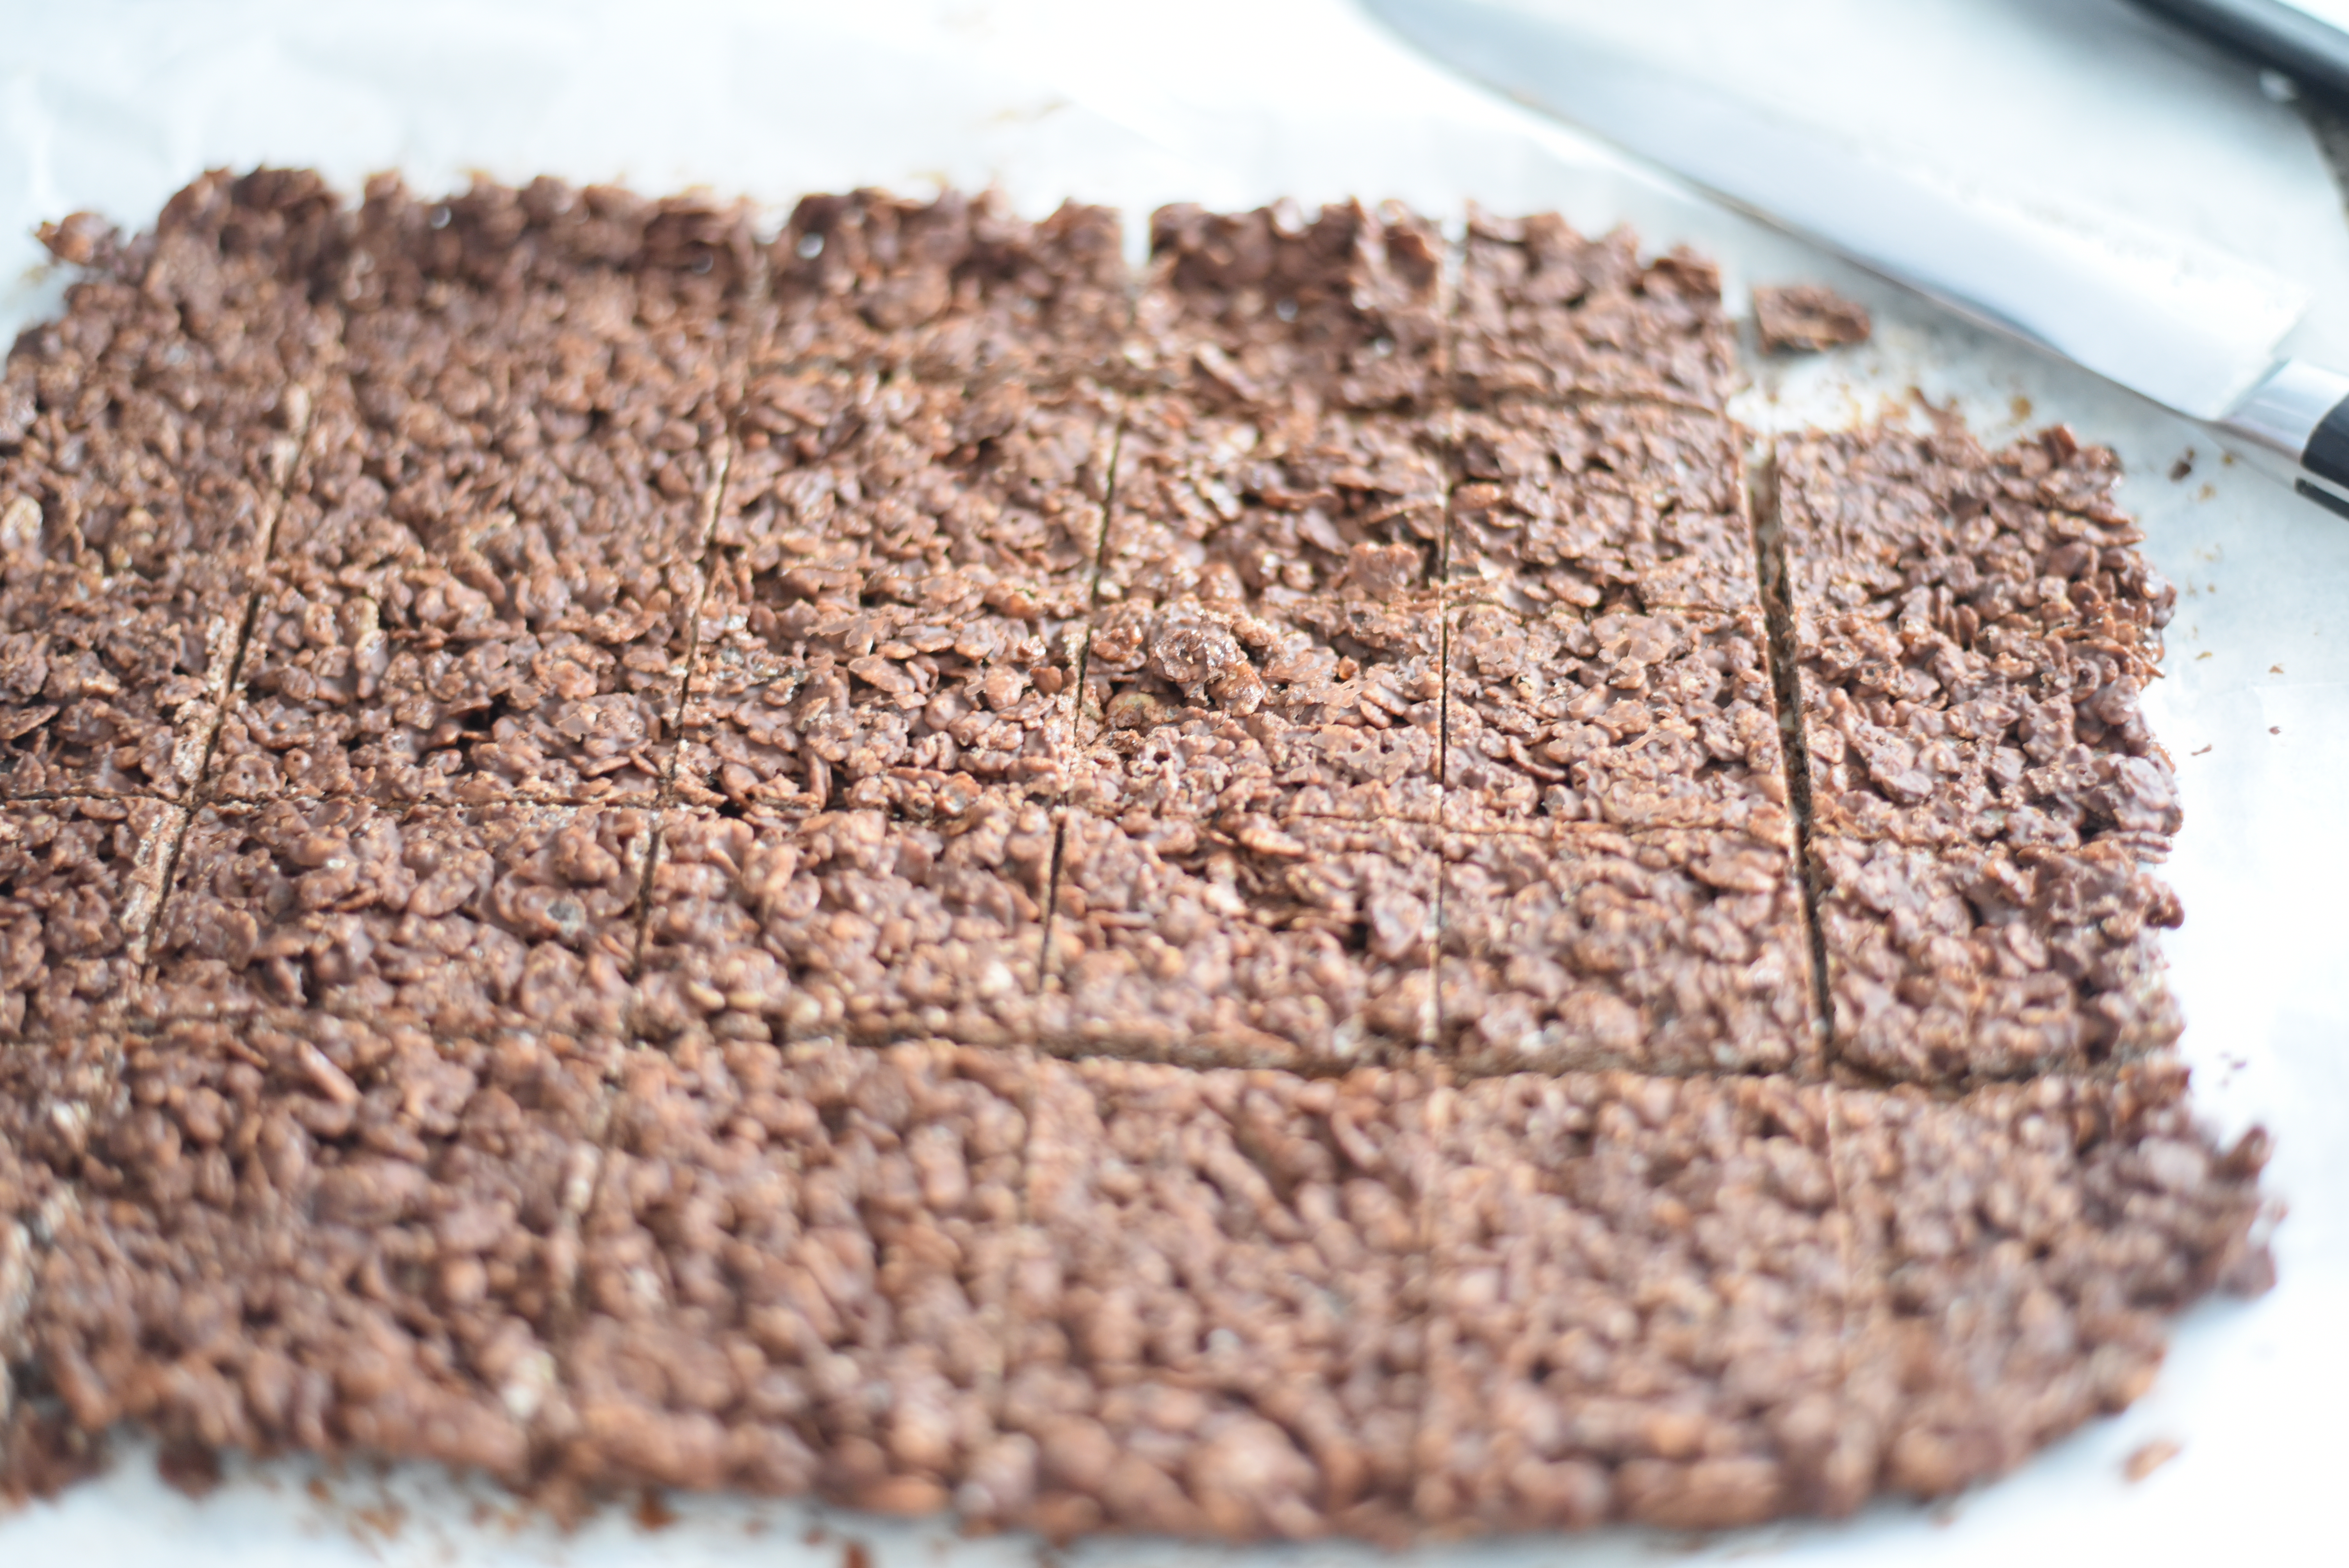 Flatten the chocolate-rice mix and place in the fridge for at least 2 hrs.